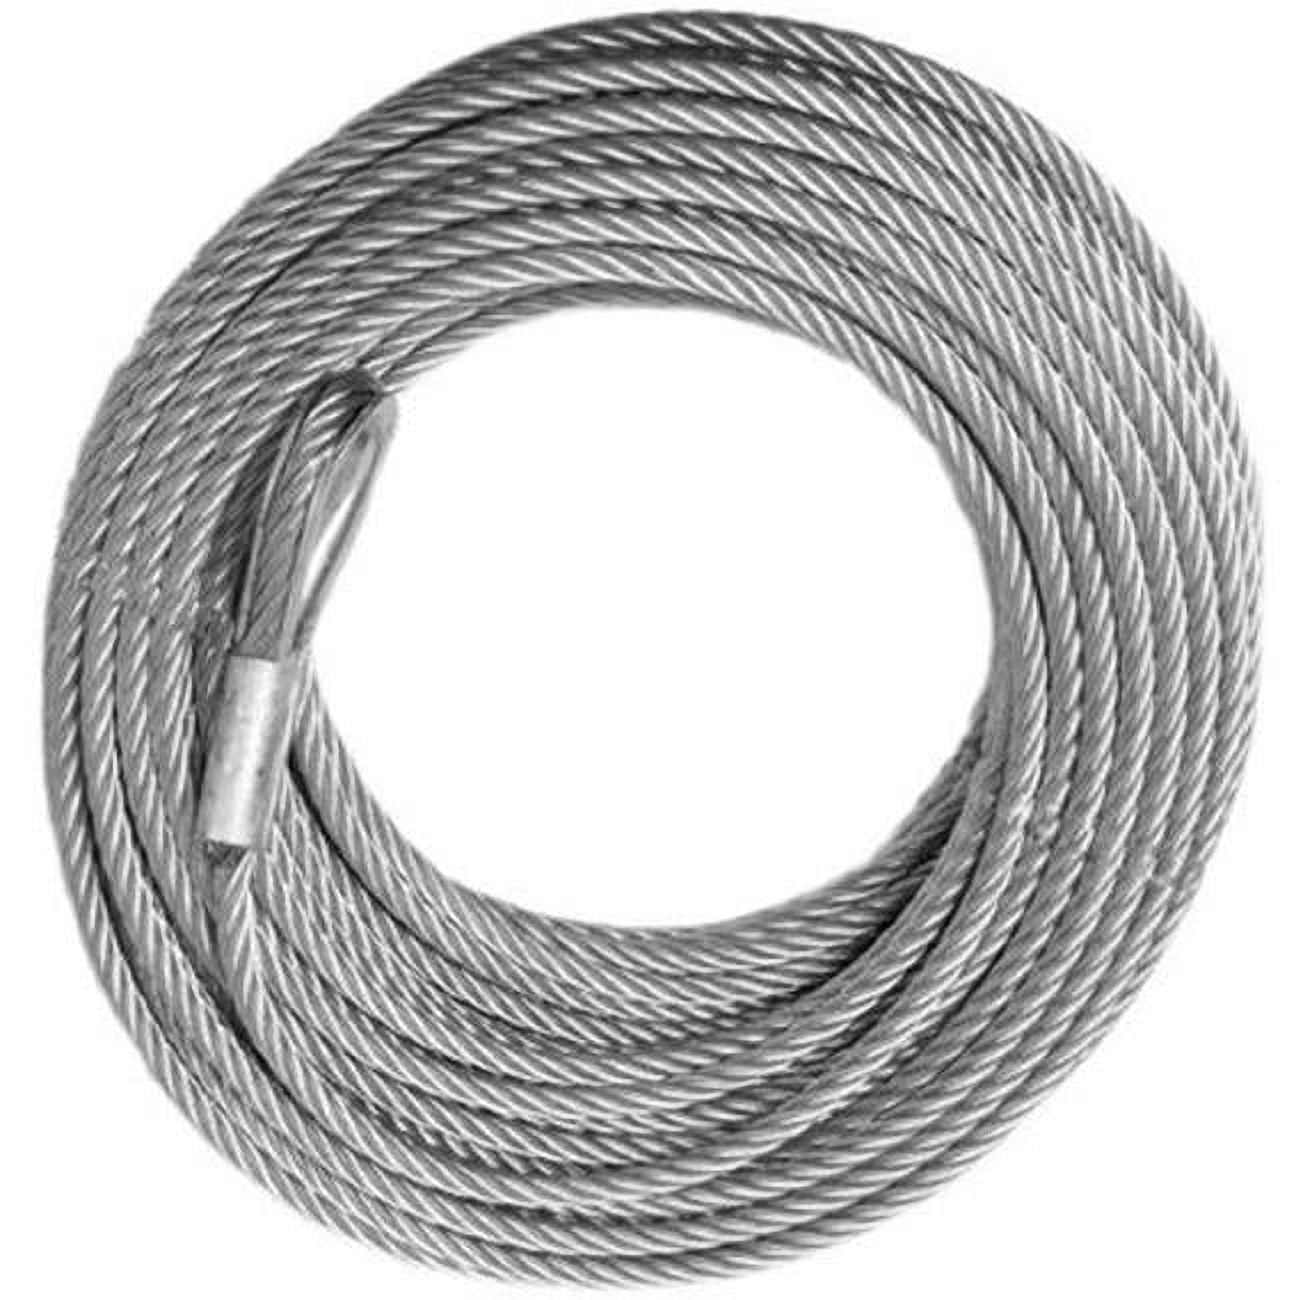 Winch Cable - Galvanized - 3/16 X 50 (4 200 Lb Strength) (vehicle Recovery)